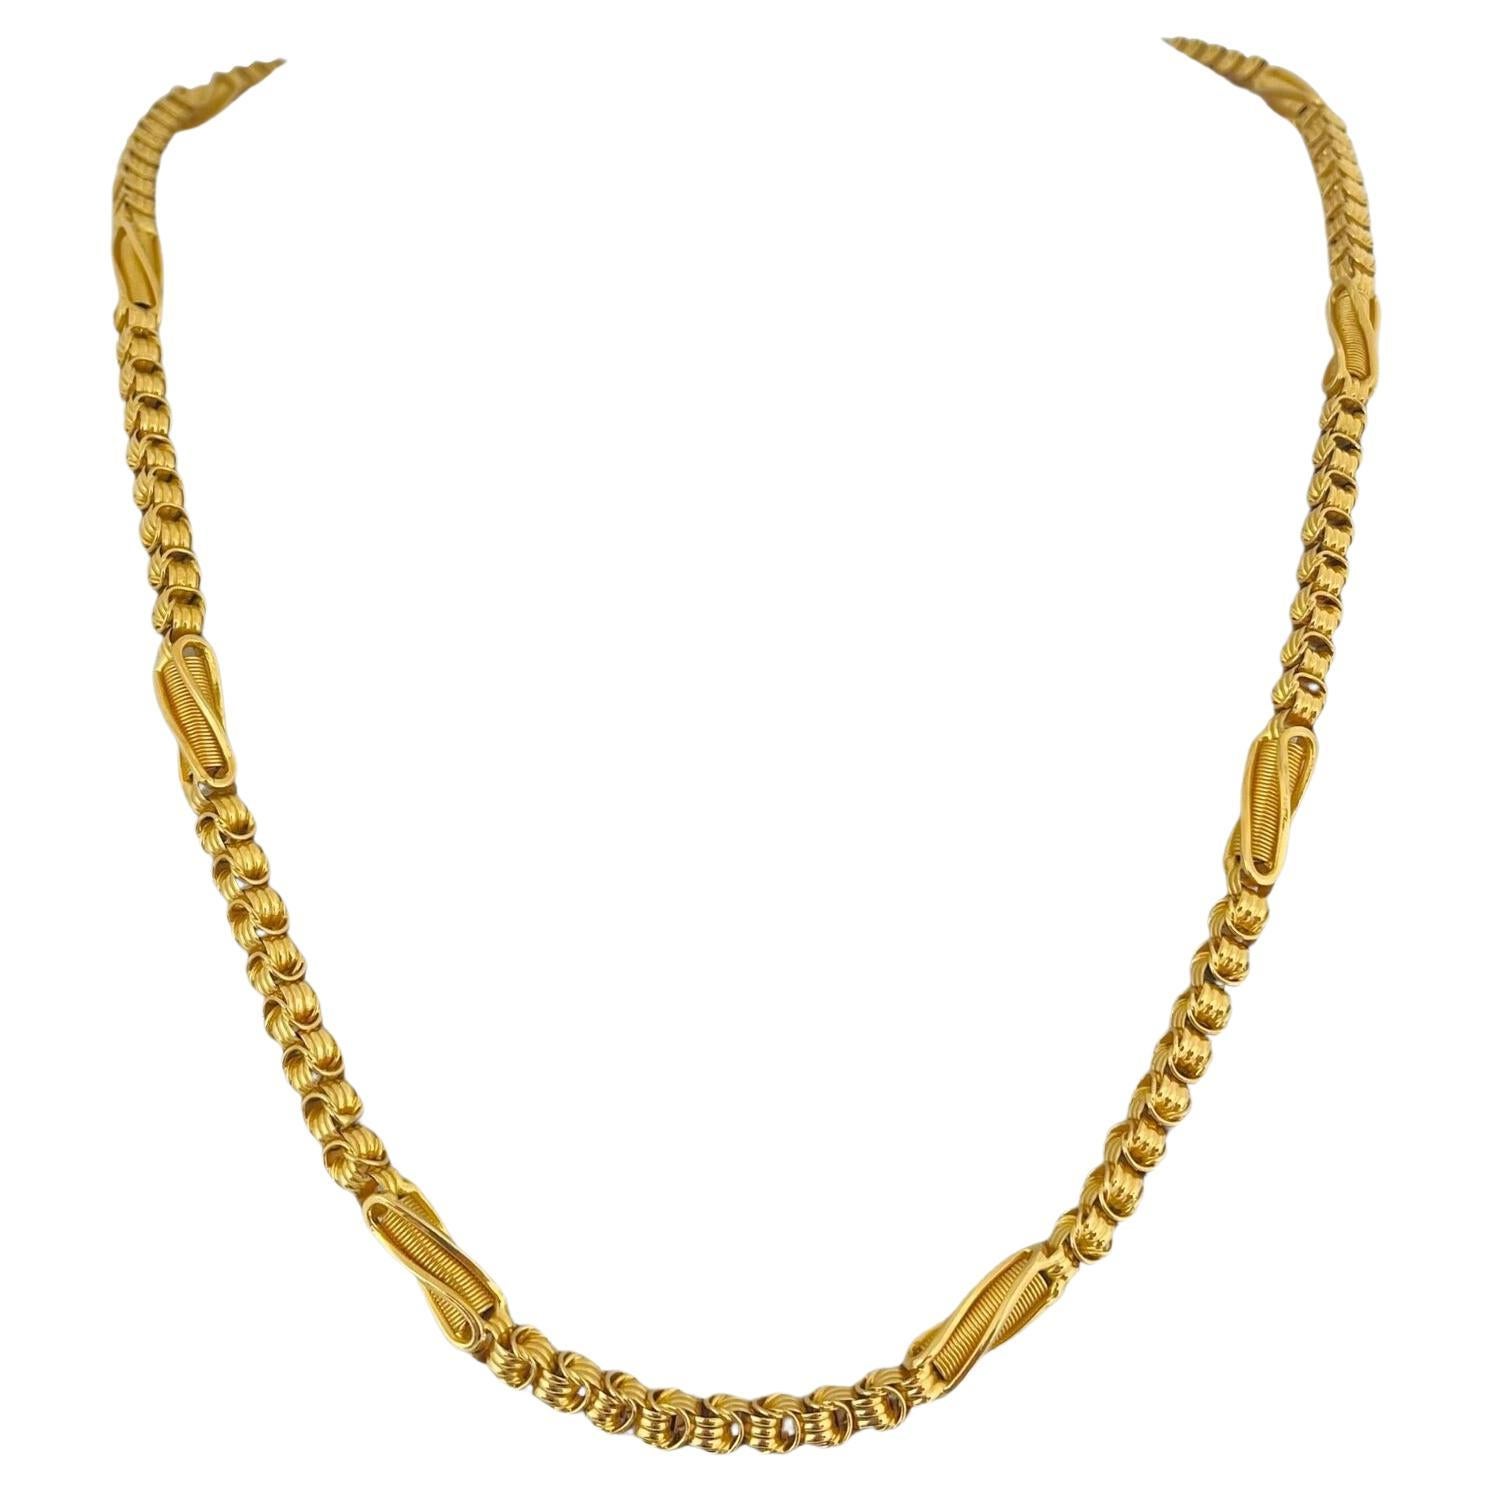 22 Karat Yellow Gold Solid Heavy Fancy Spiral Curb Link Chain Necklace ...